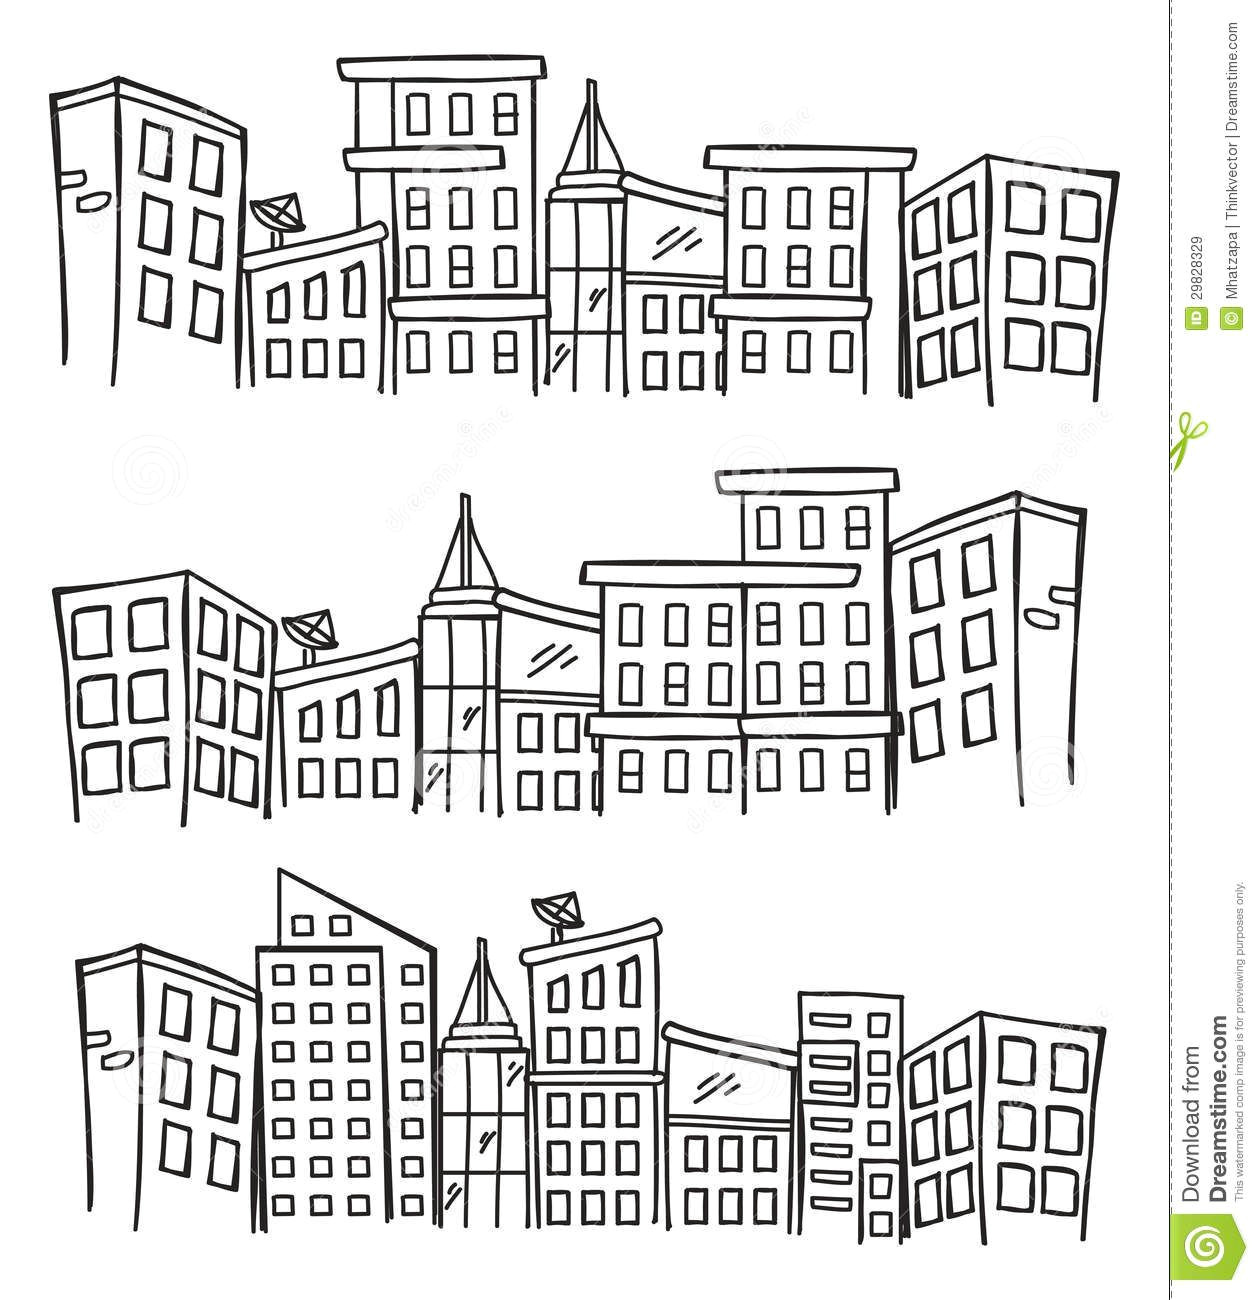 Draw Me A House Architectural Ideas Inspiration and Colouring In Gallery for Simple Cityscape Drawing Cityscape Drawing